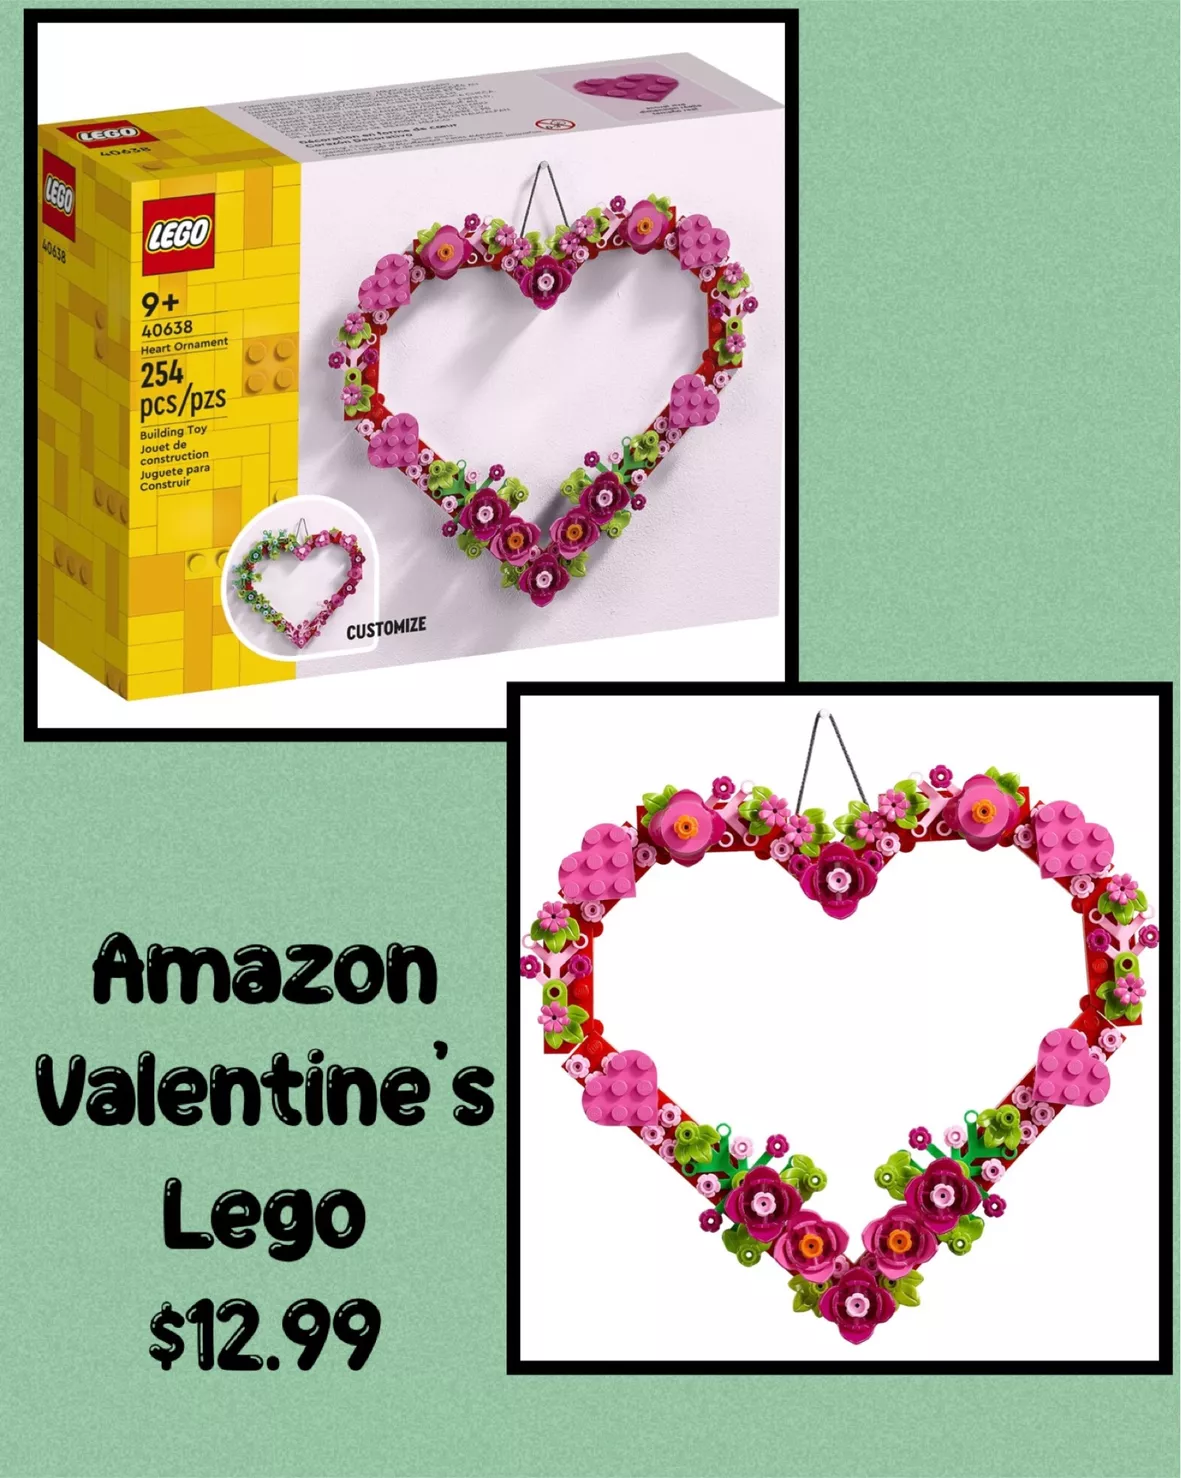 LEGO Heart Ornament Building Toy … curated on LTK